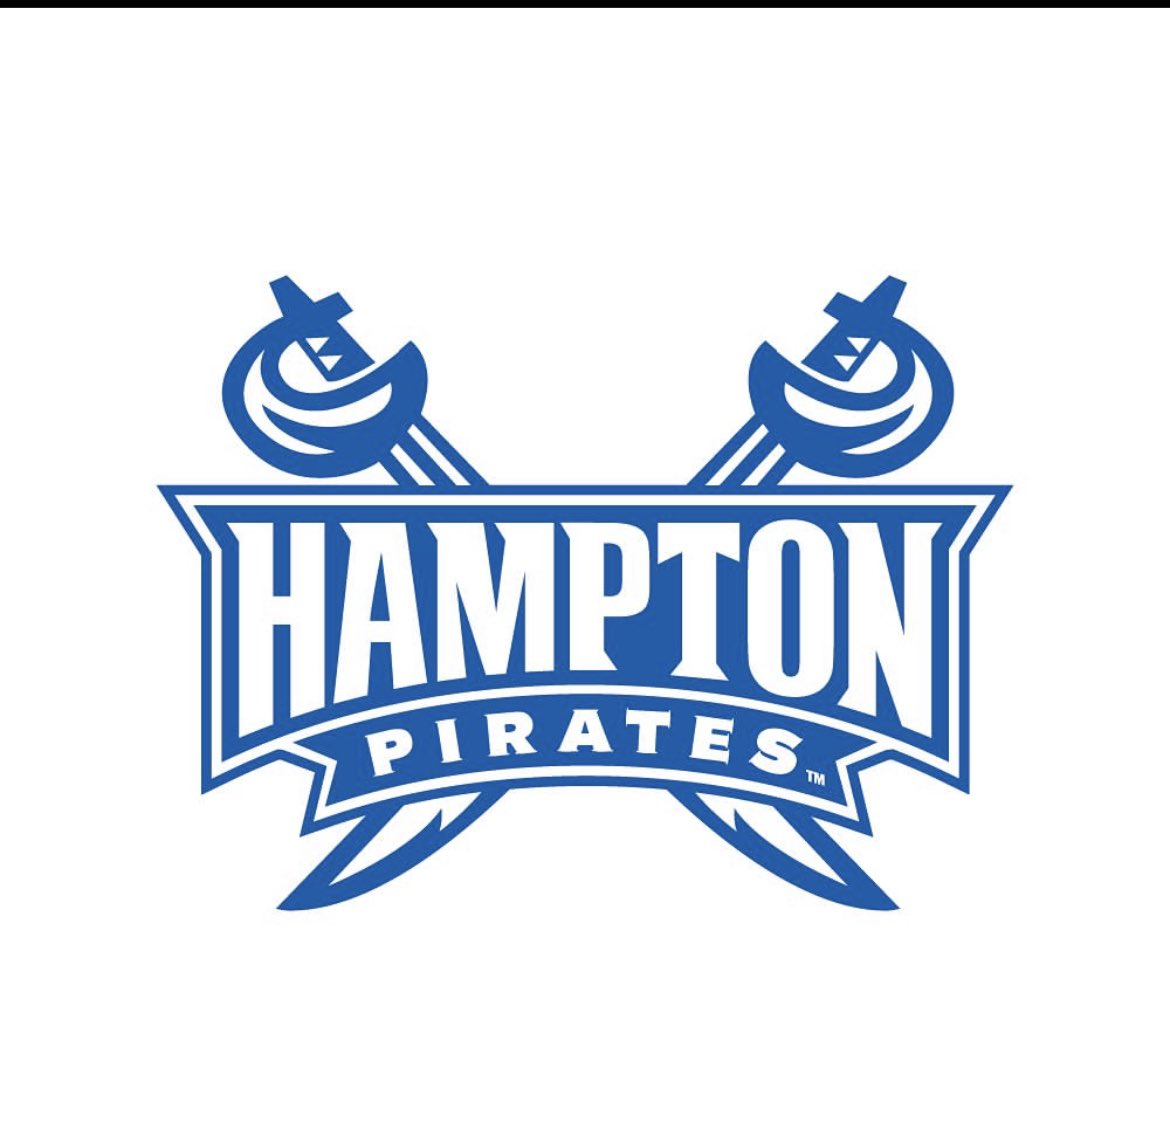 Blessed to receive an offer from Hampton today.